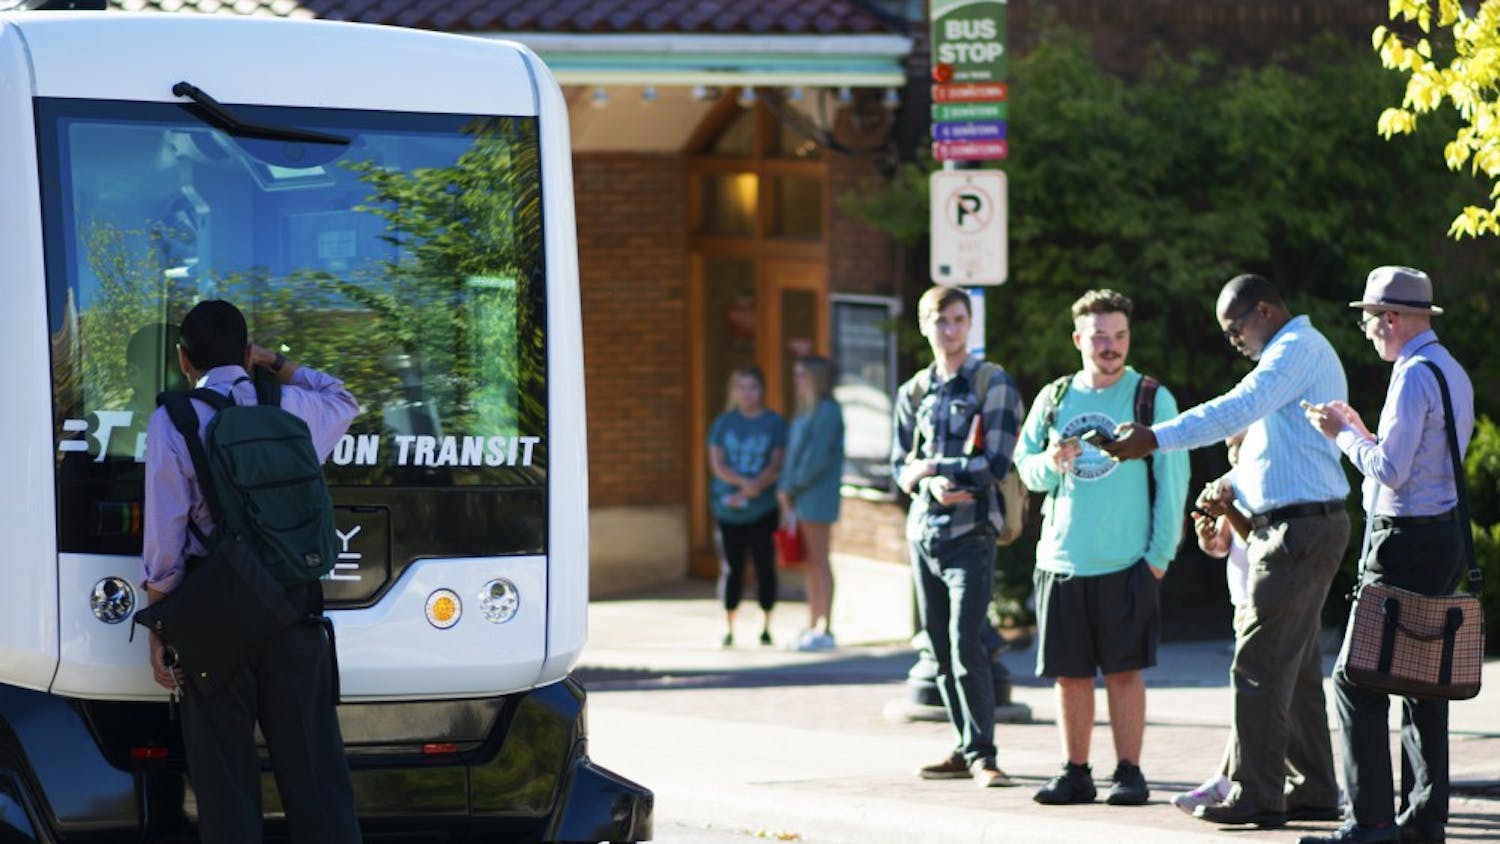 Pedestrians stop to peer into the self-driving bus and take pictures of it at its parked location on Kirkwood Avenue. EasyMile, a French autonomous vehicle maker, will be providing free rides in their EZ10 bus model to attendees on Friday from 10 a.m. to 4:30 p.m.